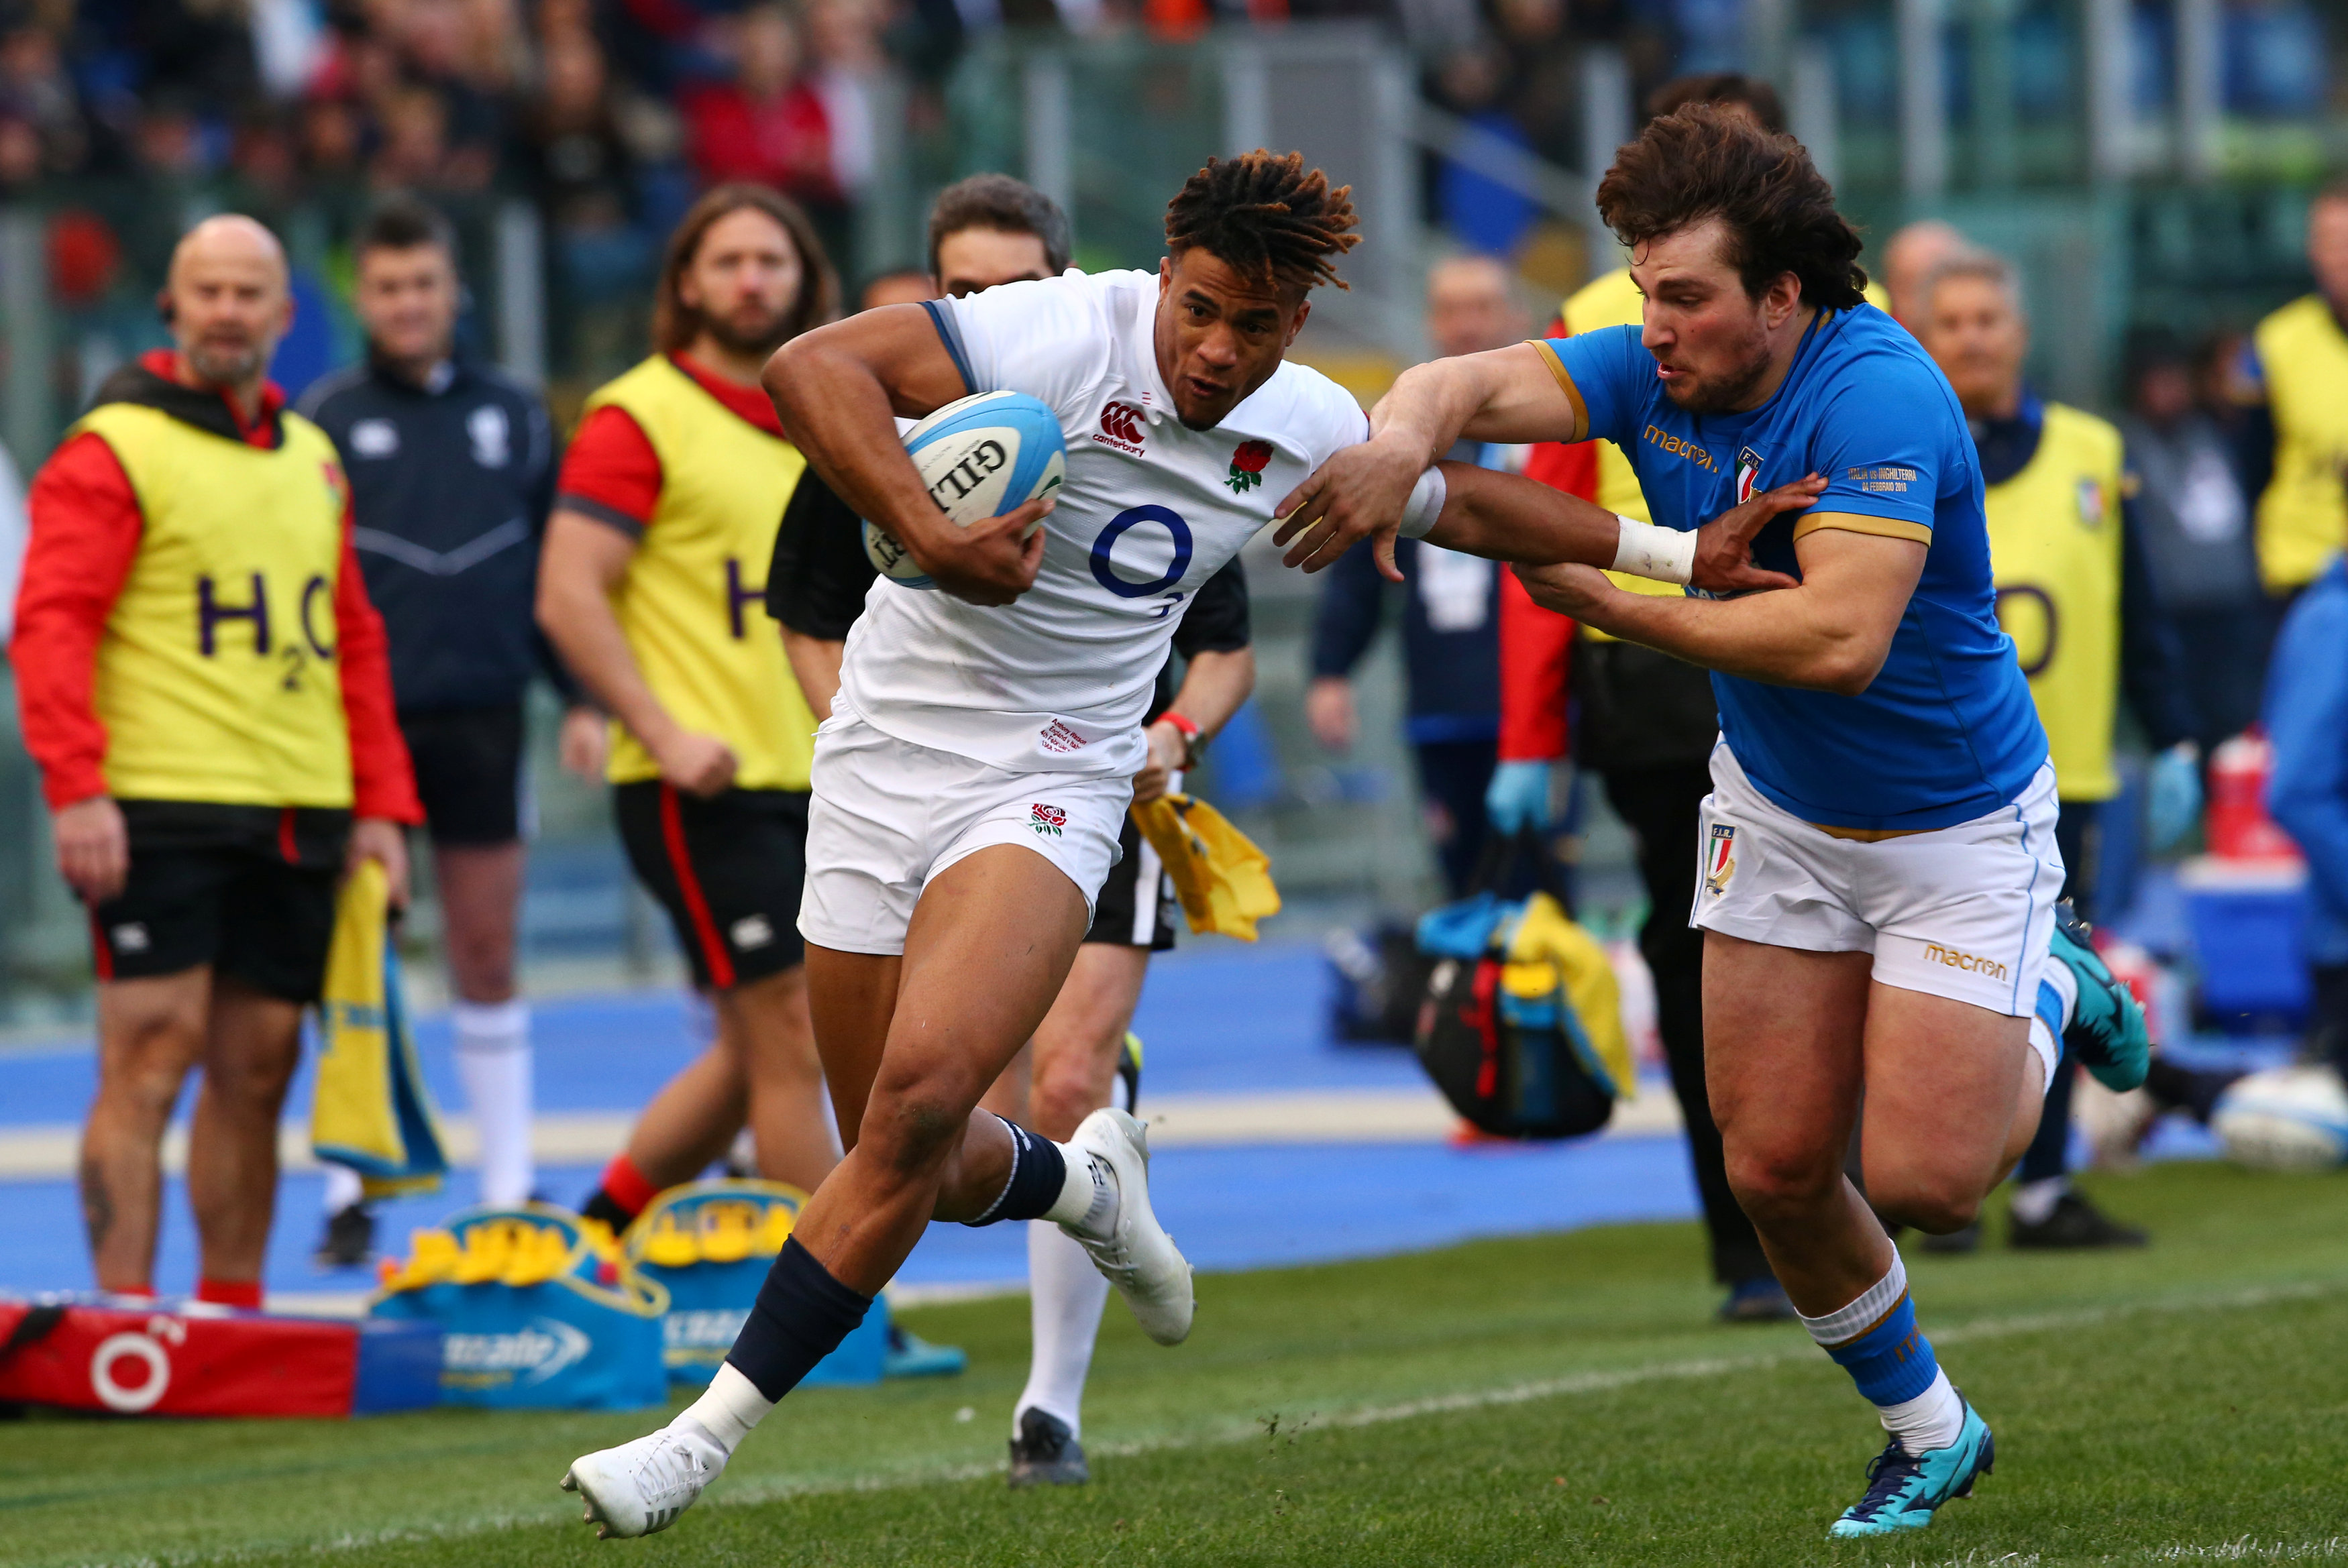 Rugby: England rack up seven tries in emphatic win over Italy